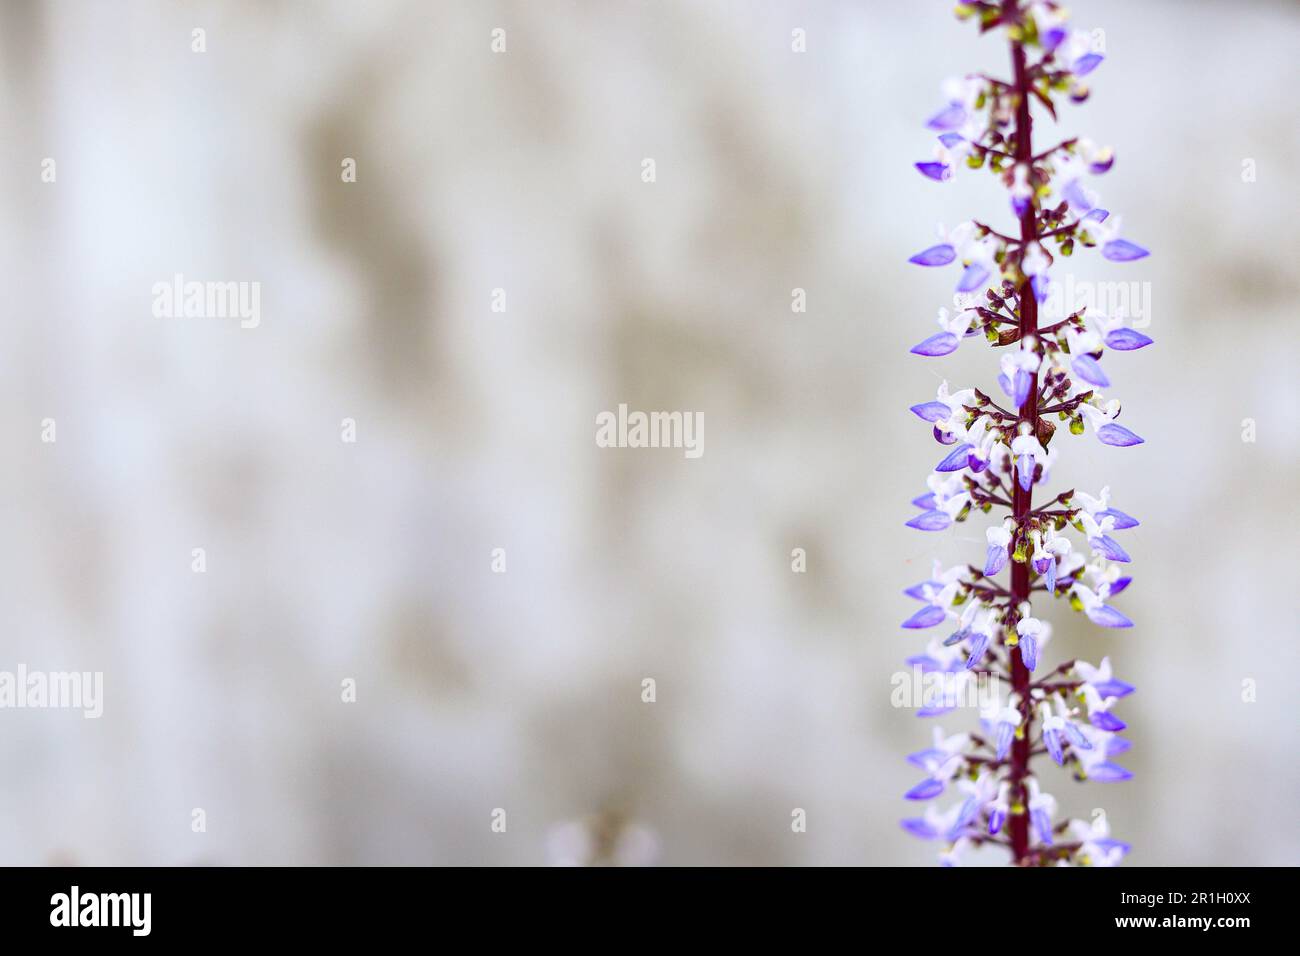 Close up of Plectranthus scutellarioides or Solenostemon or Coleus flower shallow focus on concrete wall background. Stock Photo